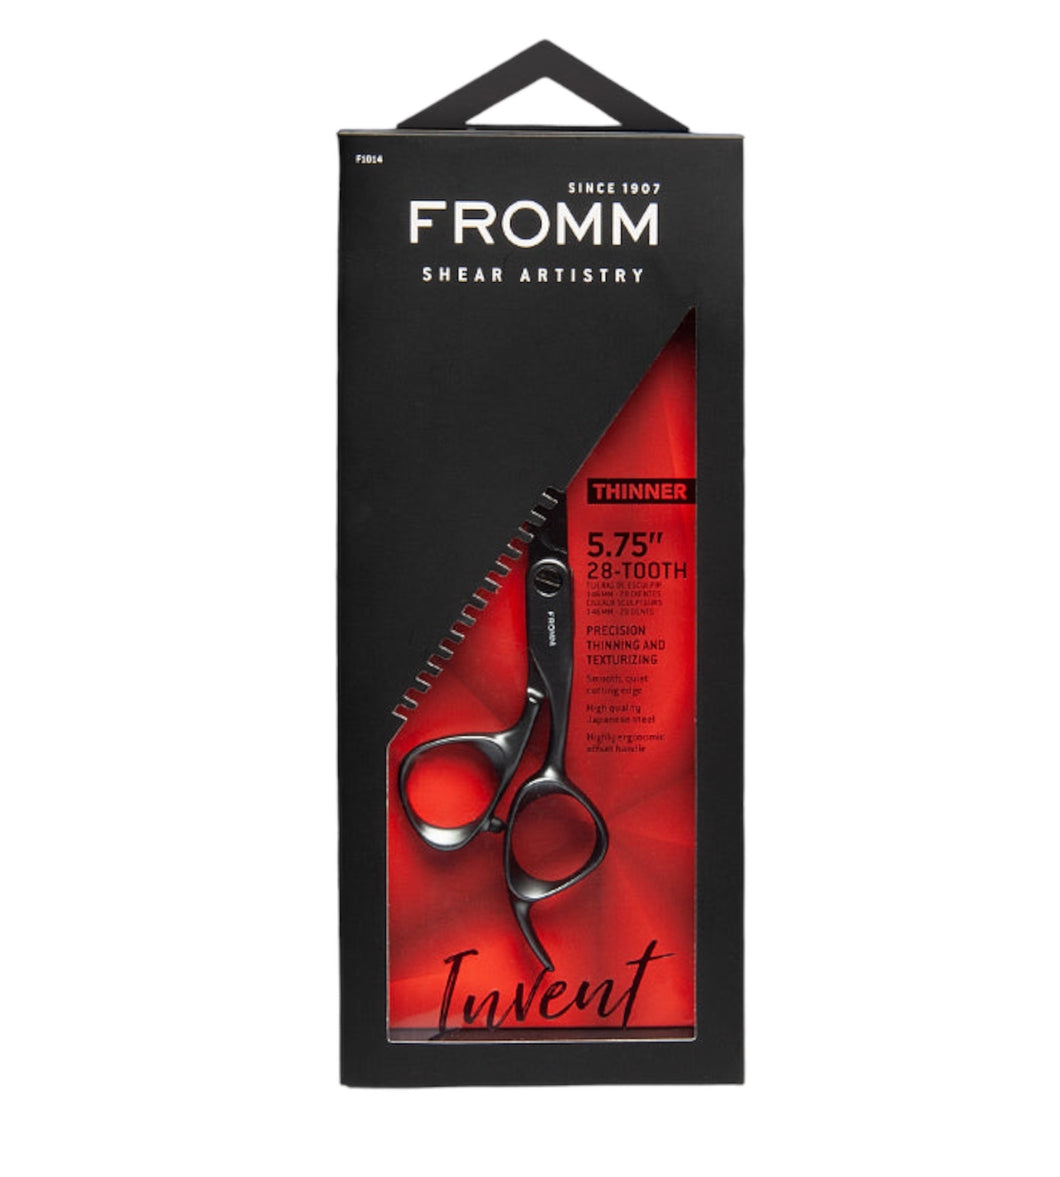 FROMM INVENT 5.75” 28 TOOTH HAIR THINNING SHEAR F1014